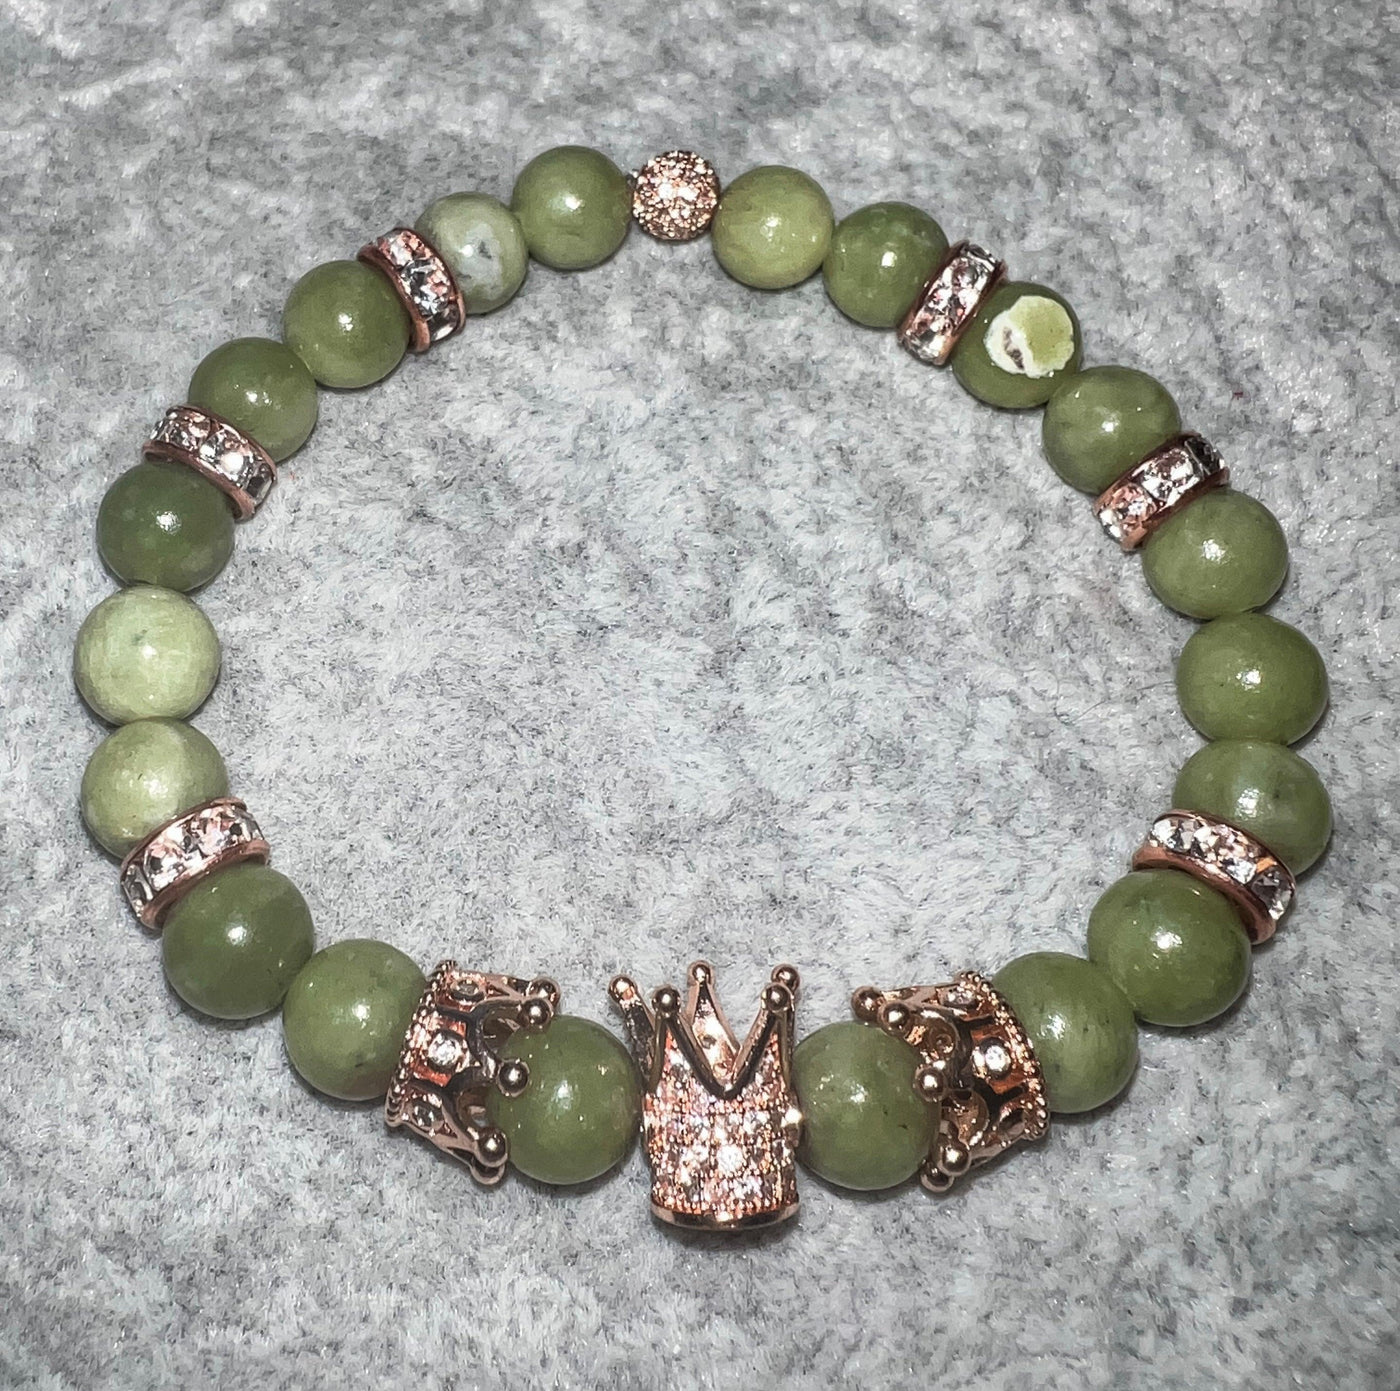 Rose Gold Crown Bead Bracelet with Jade Beads - Brent's Bling